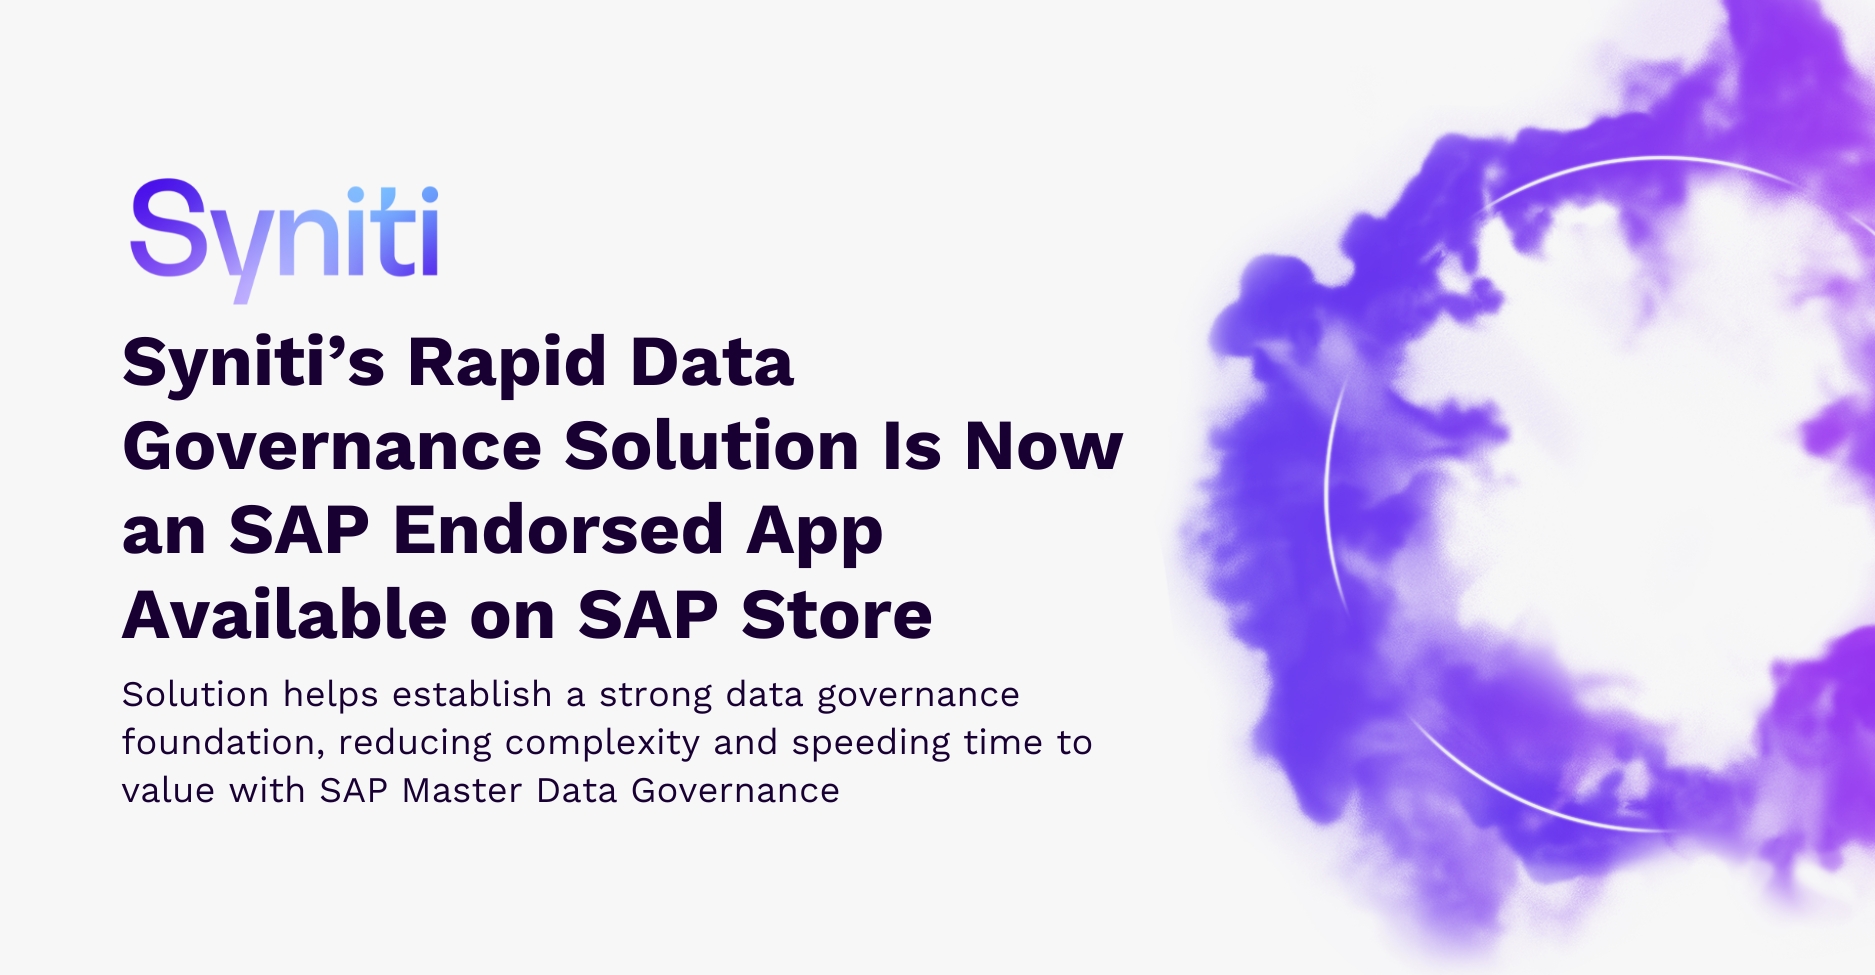 Syniti’s Rapid Data Governance Solution Is Now an SAP Endorsed App Available on SAP Store